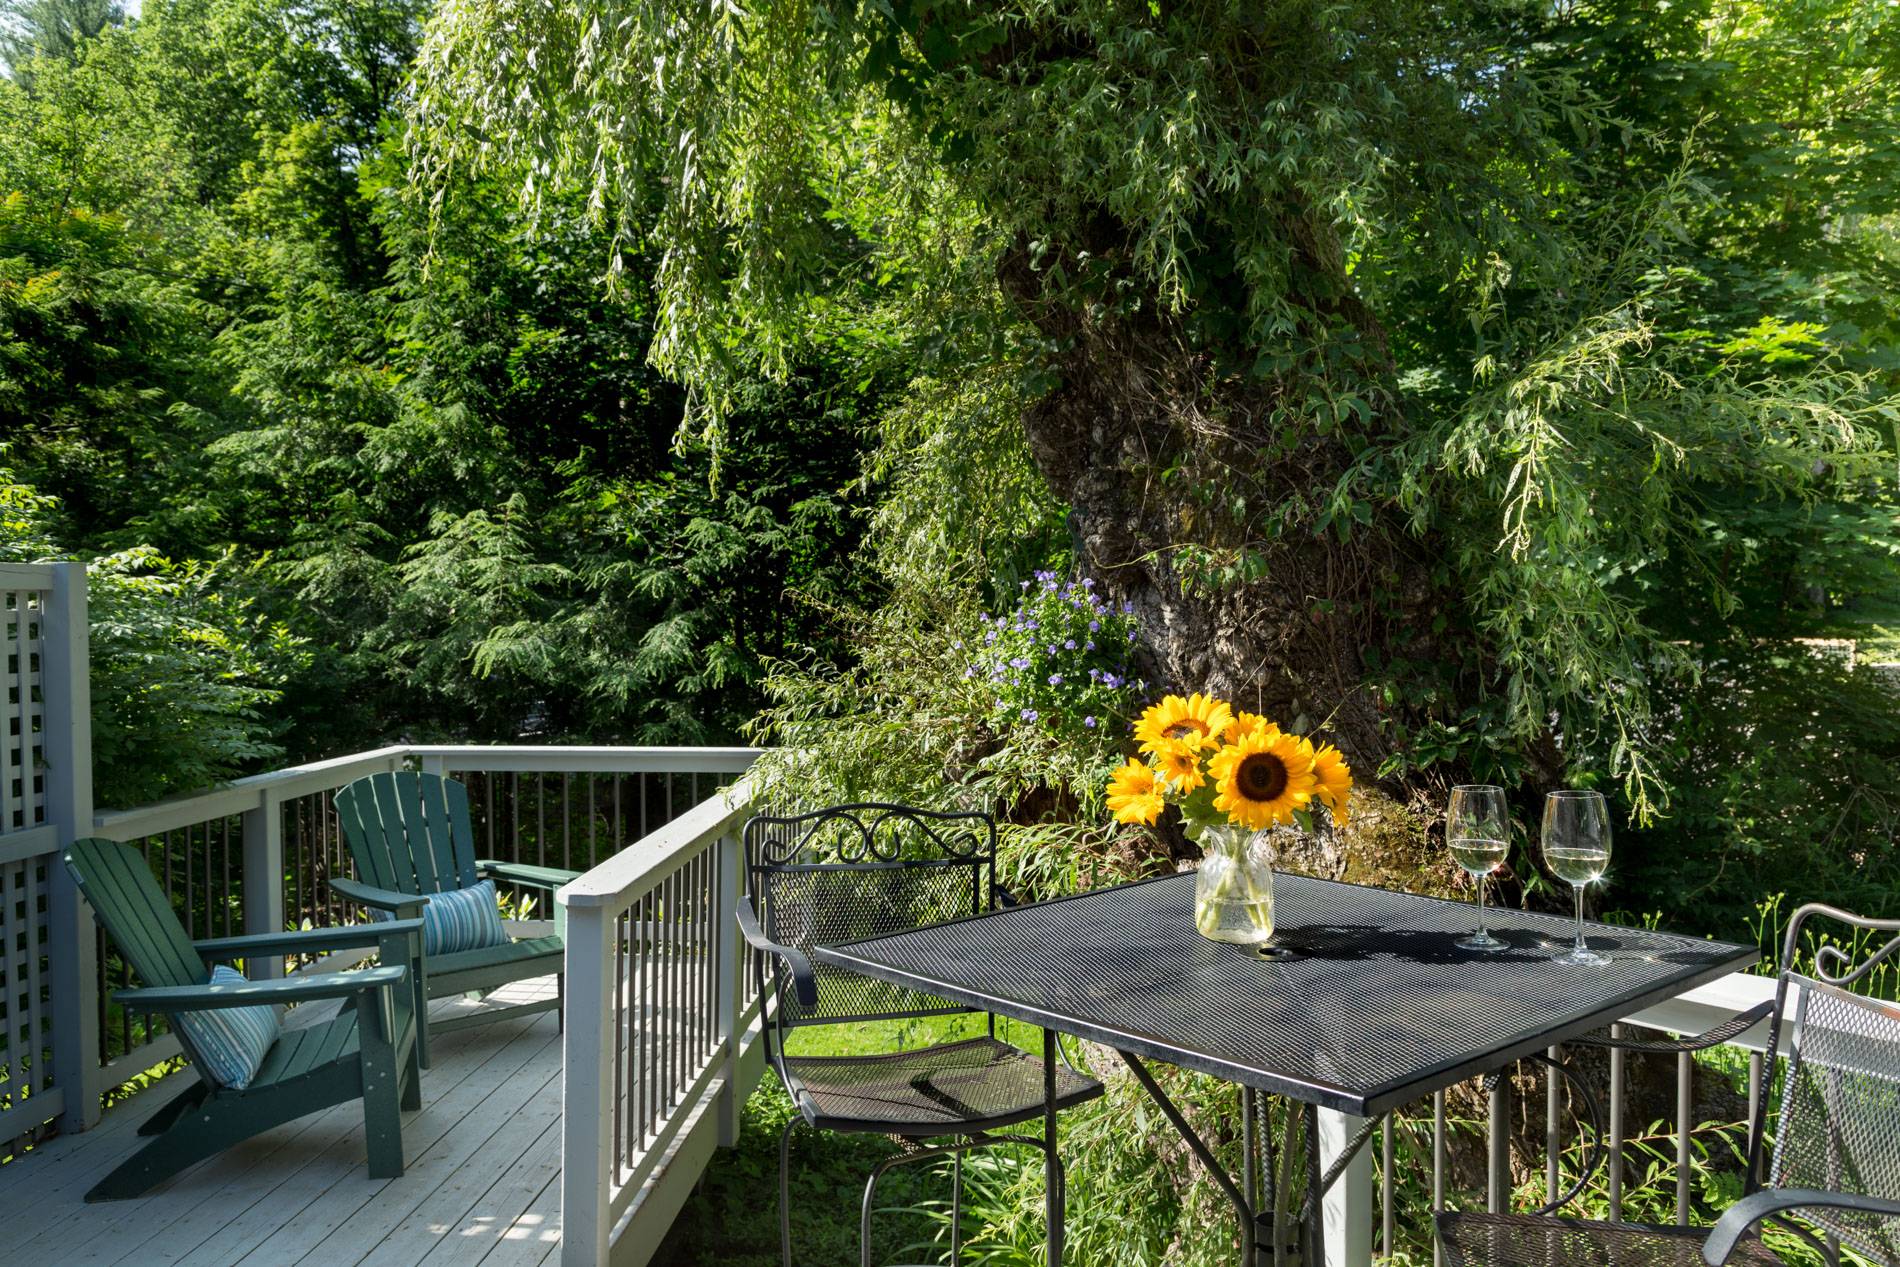 Table with yellow sunflowers and green trees in background